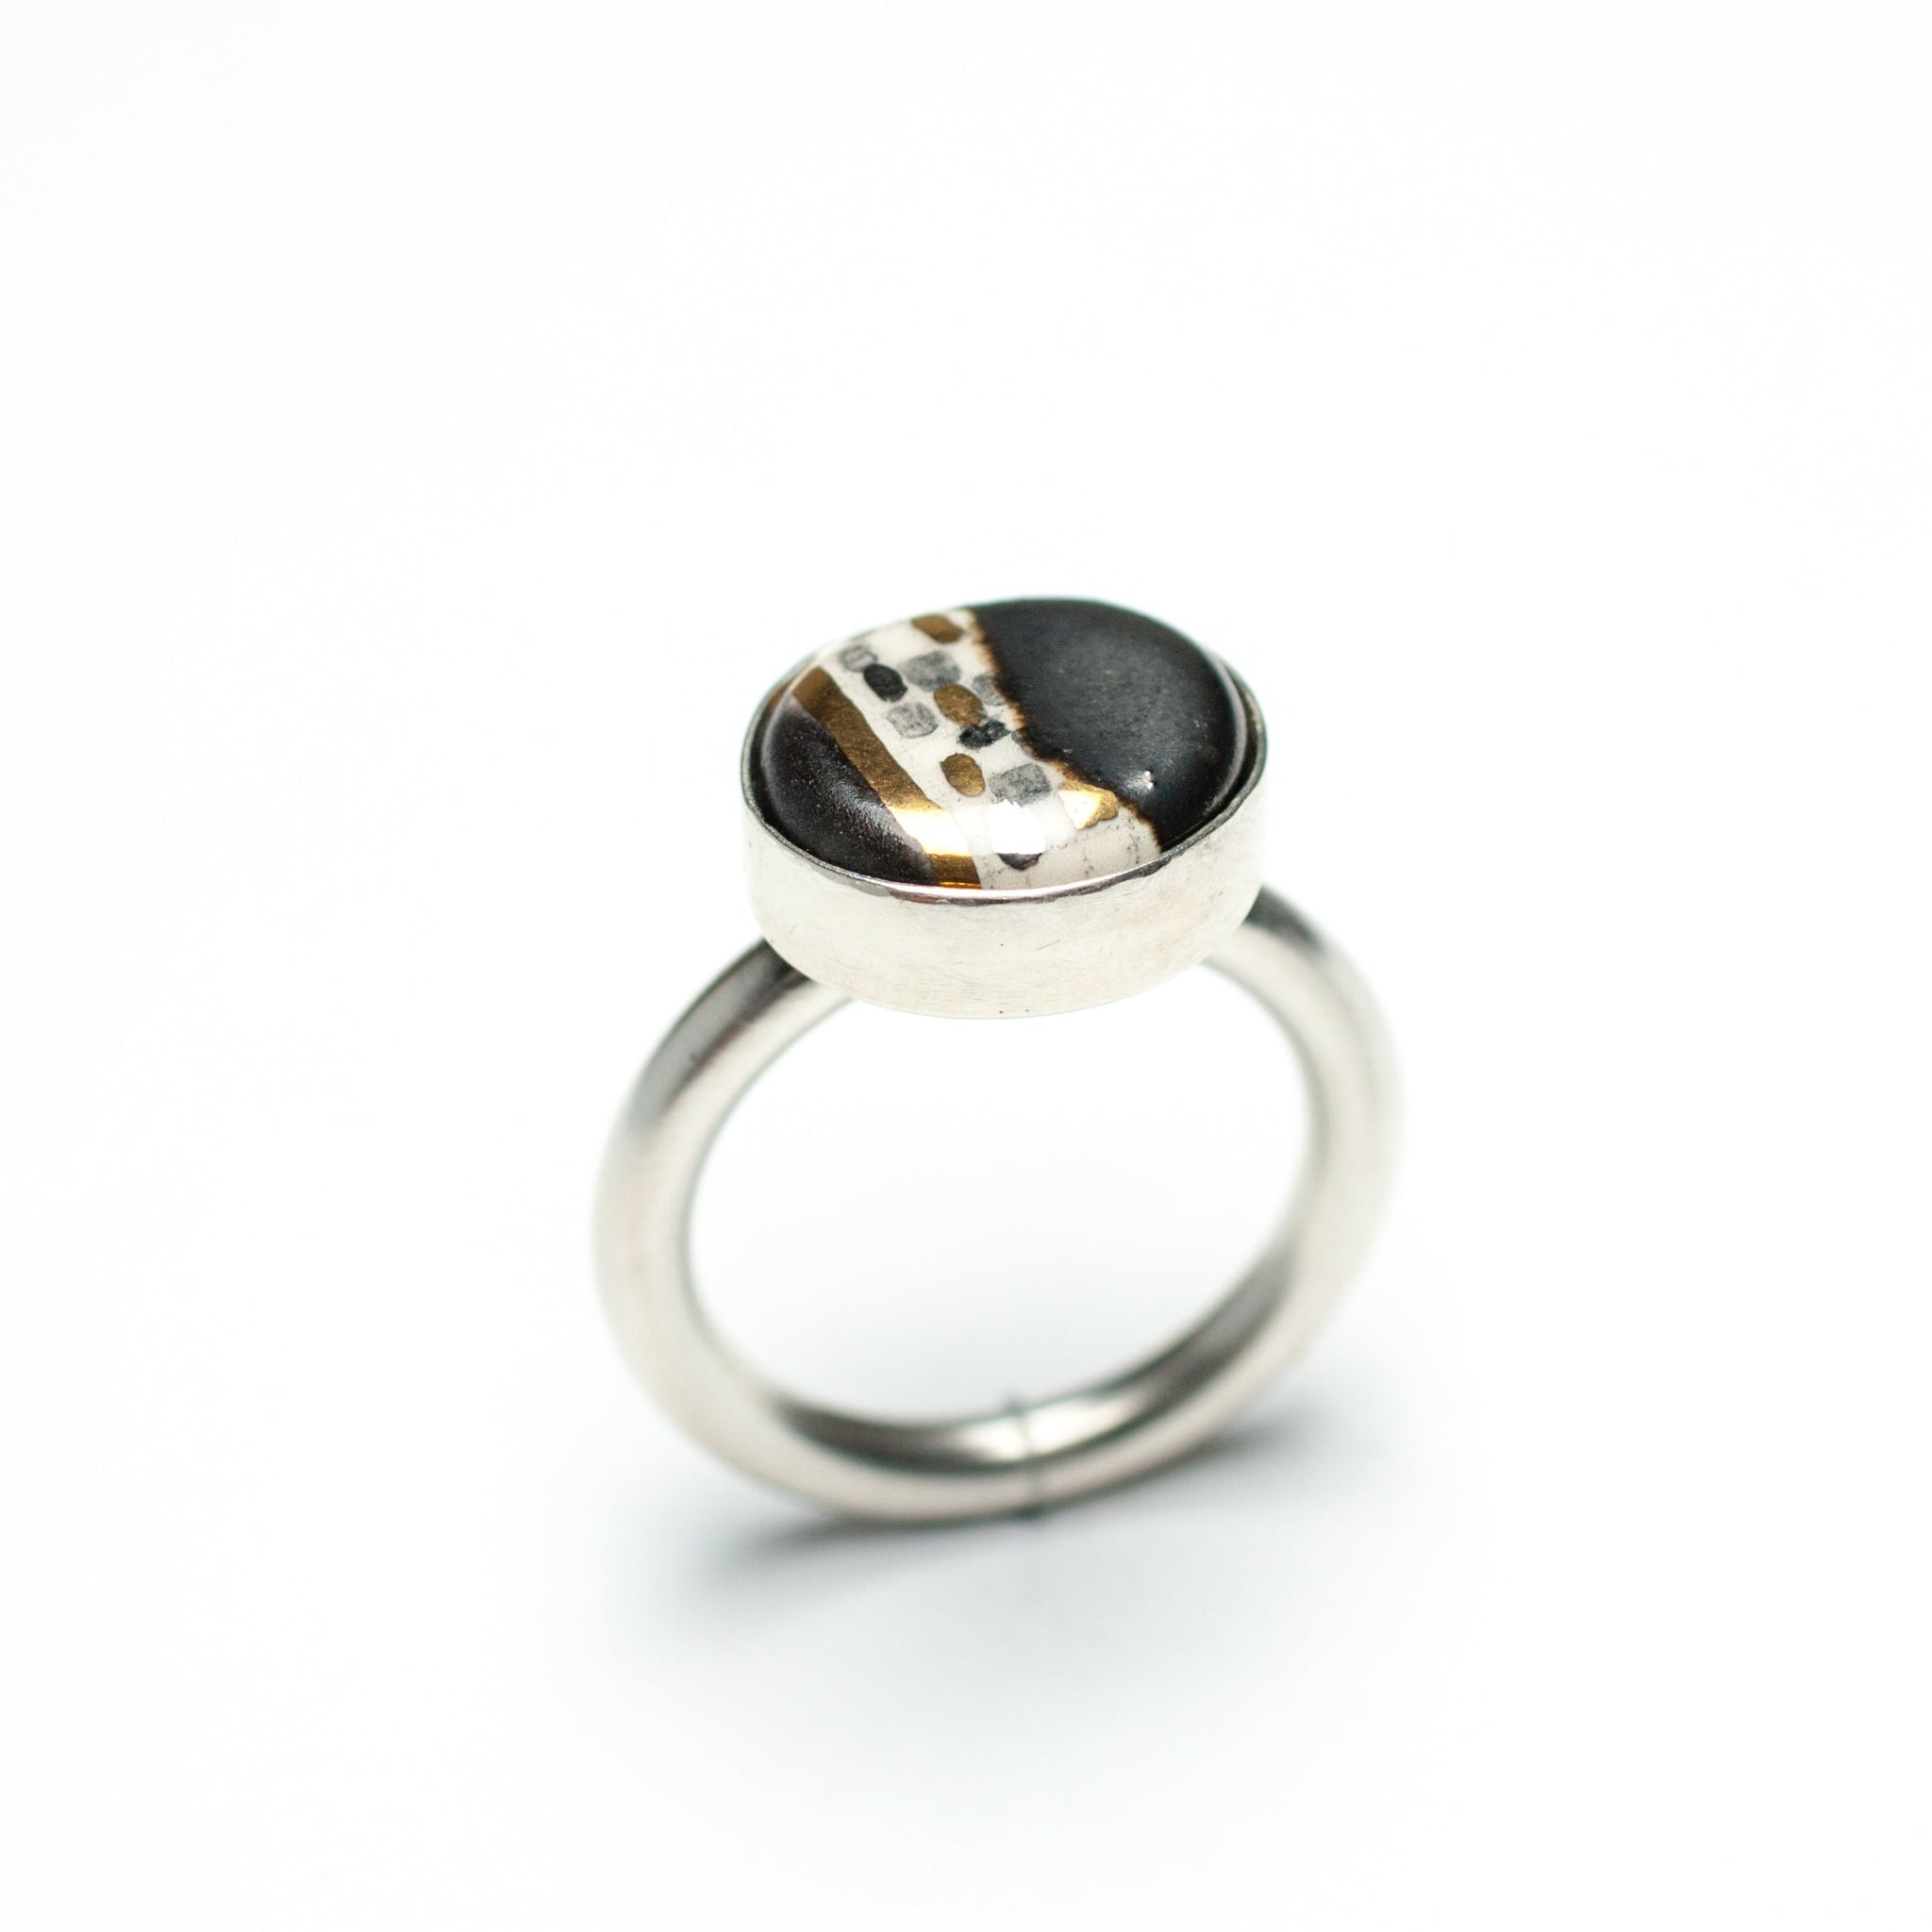 Ring DELAUNAY size 18 - Aiste Jewelry